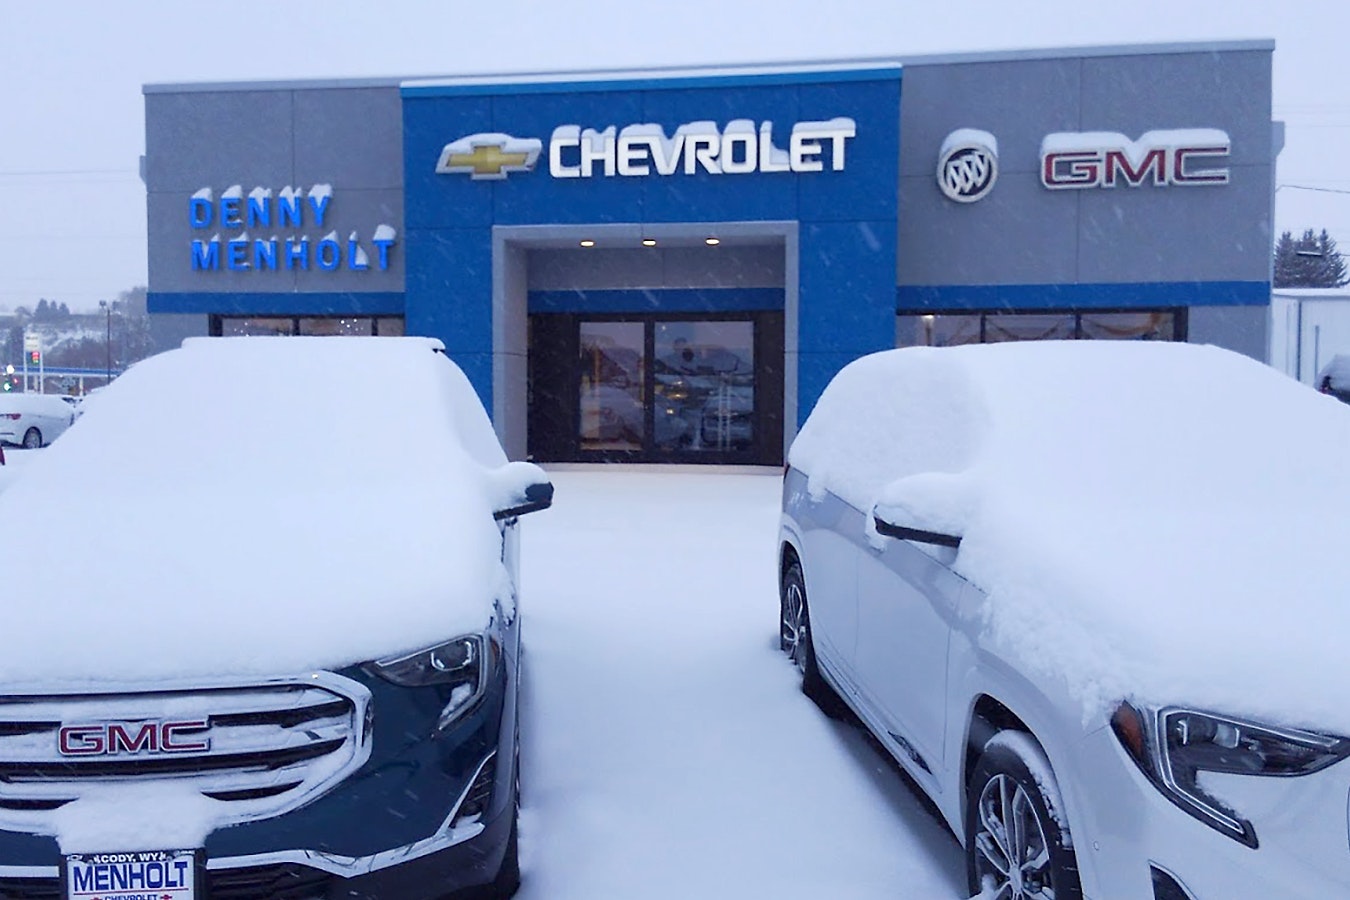 Denny Menholt Chevrolet GMC in Cody is one of two Wyoming dealerships to drop the Buick brand over EV regulations.